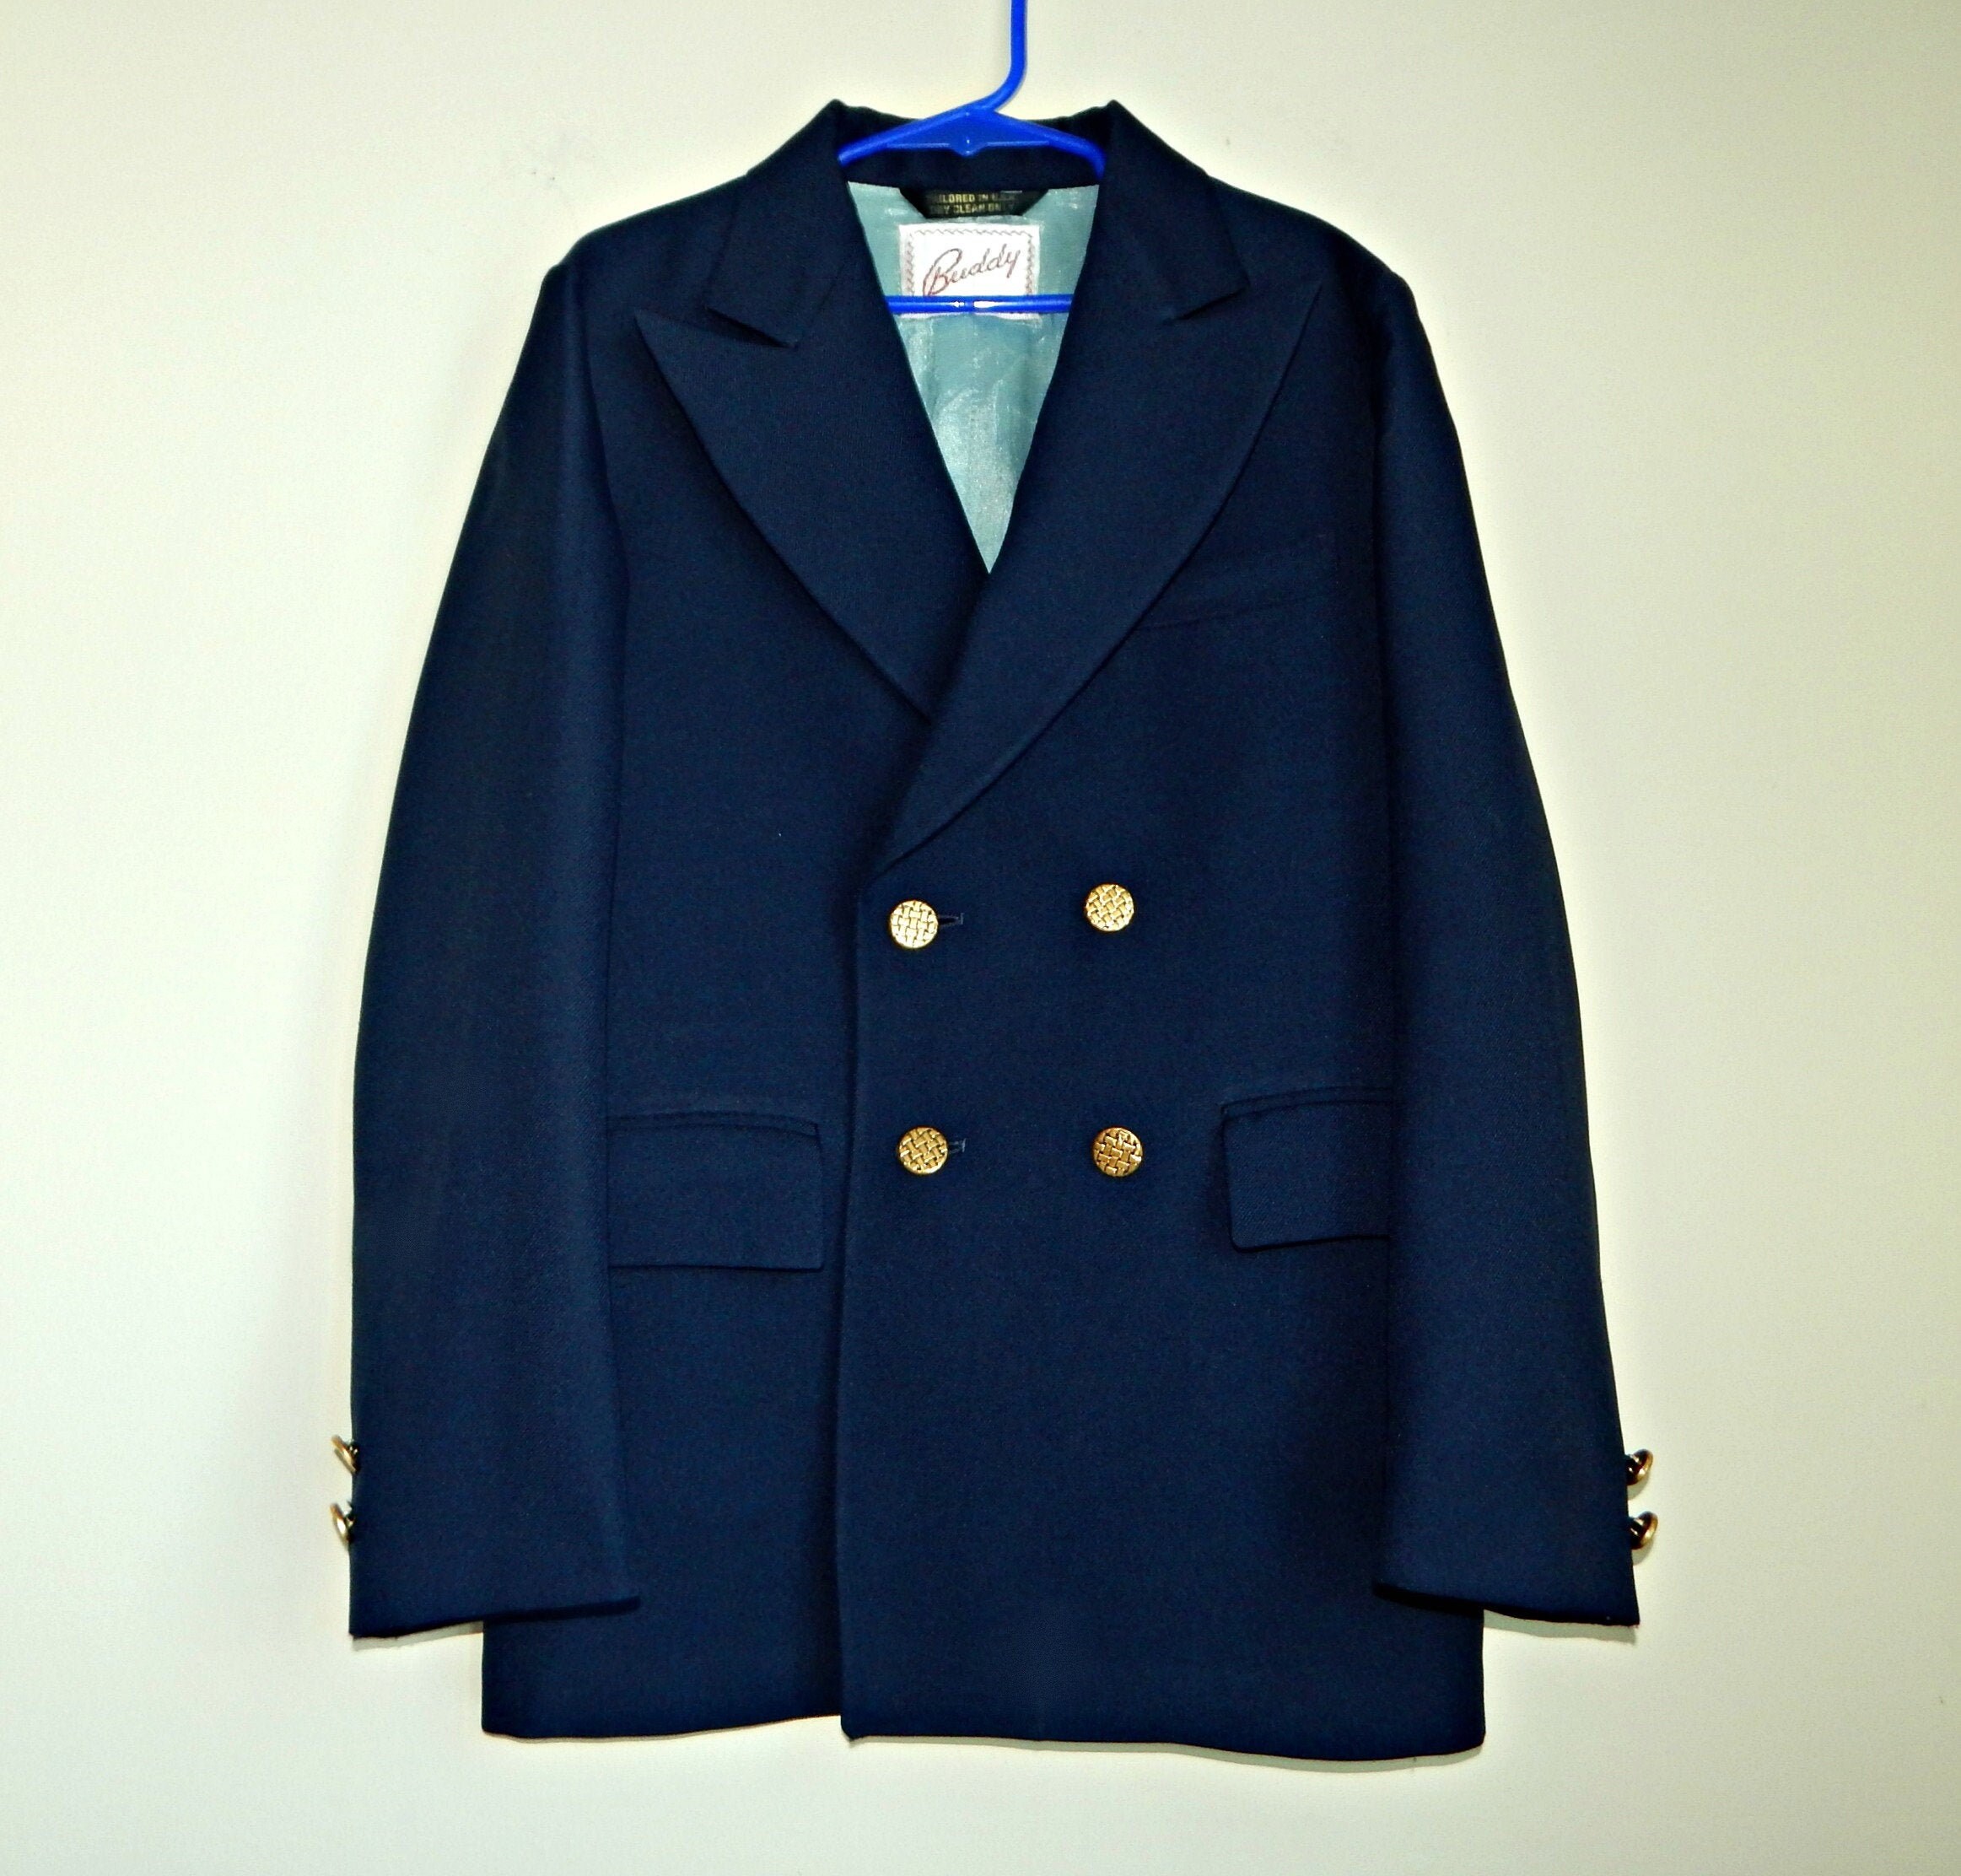 Boys Navy Blue Wool Double Breasted Suit Jacket Size 5 6 - Etsy